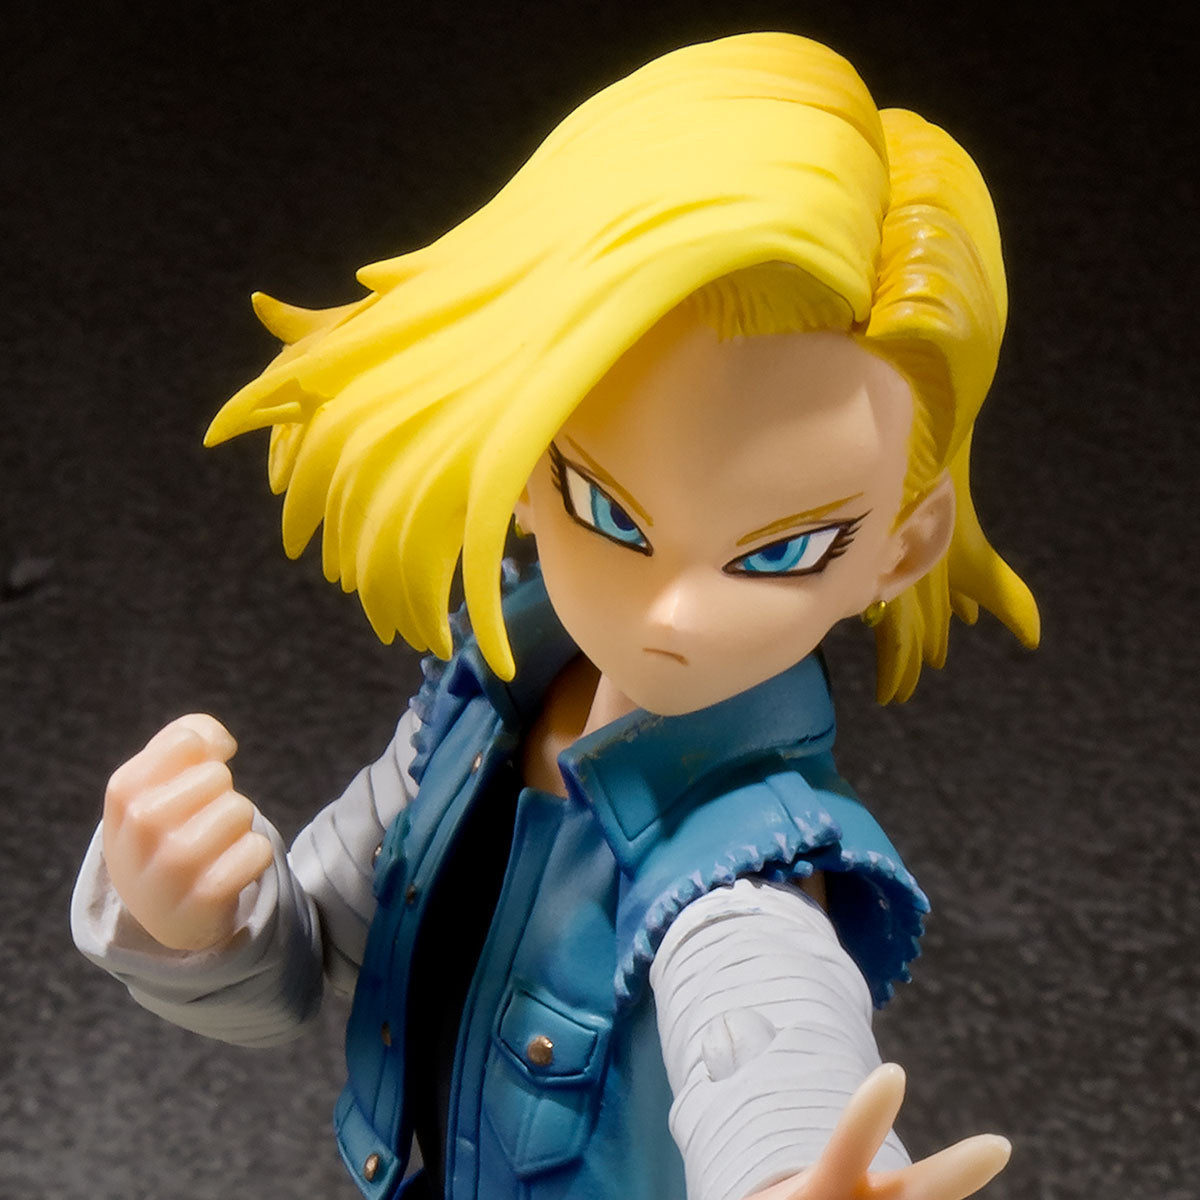 S.H. Figuarts - Dragon Ball - Android 18 2020 Event Exclusive